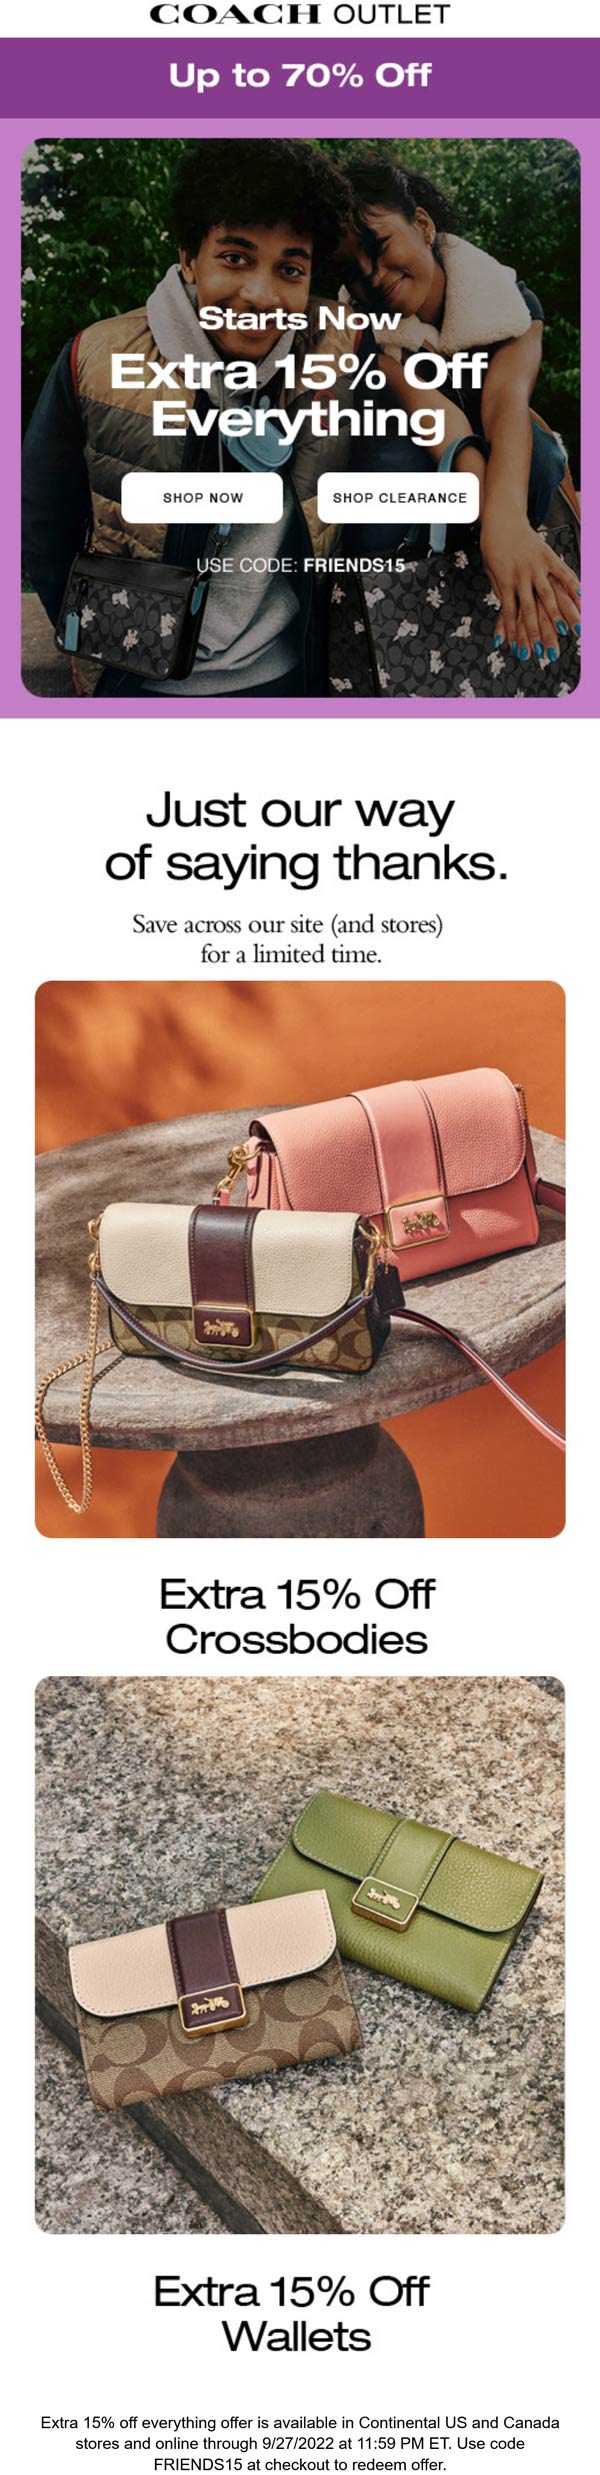 Coach Outlet coupons & promo code for [December 2022]